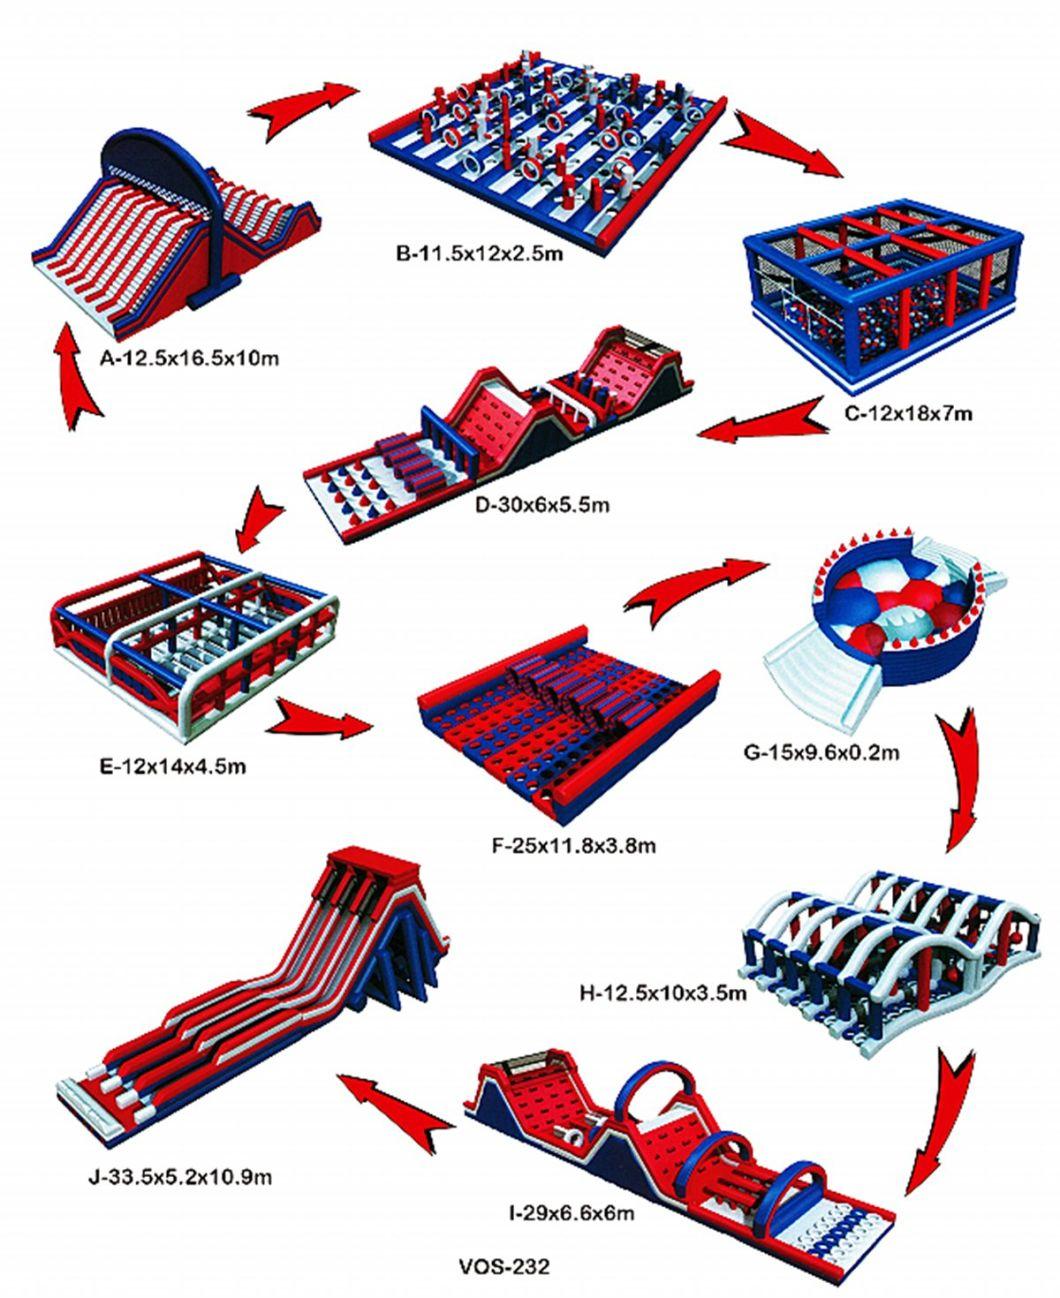 Commercial Outdoor Sports Games Inflatable 5K Adult Inflatable Obstacle Course Races